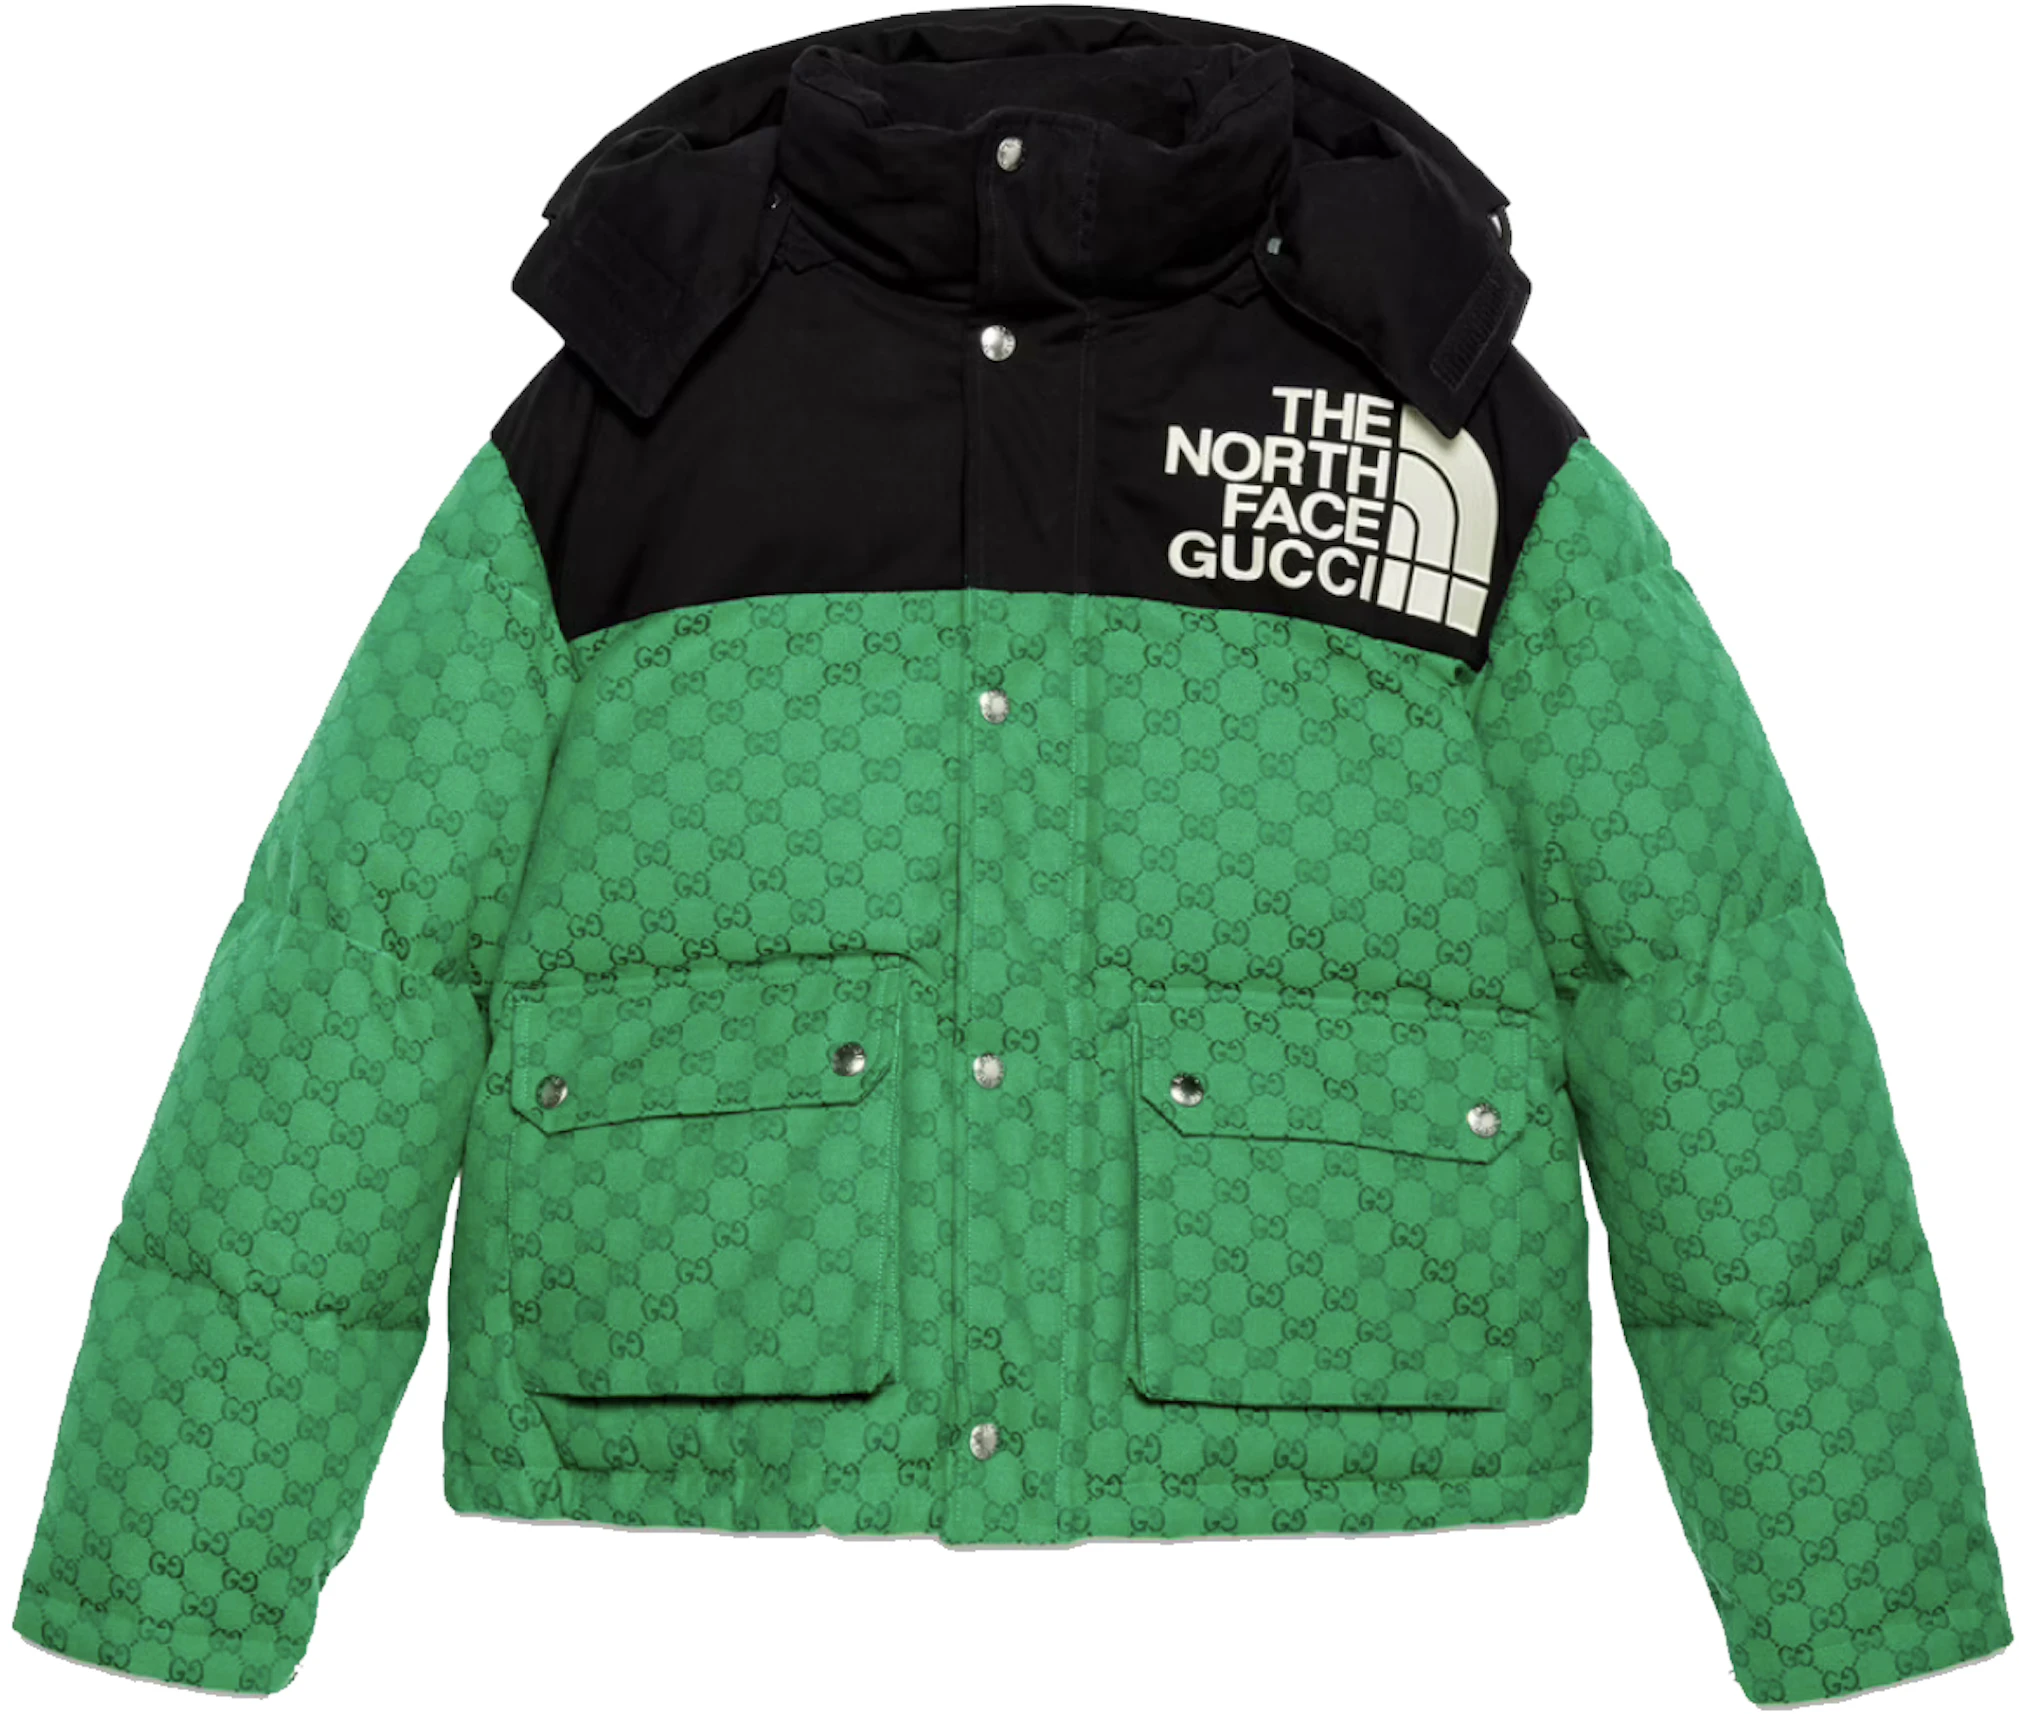 The North Face X Gucci Drops New Styles, Plans Pop-up Shops – WWD | vlr ...